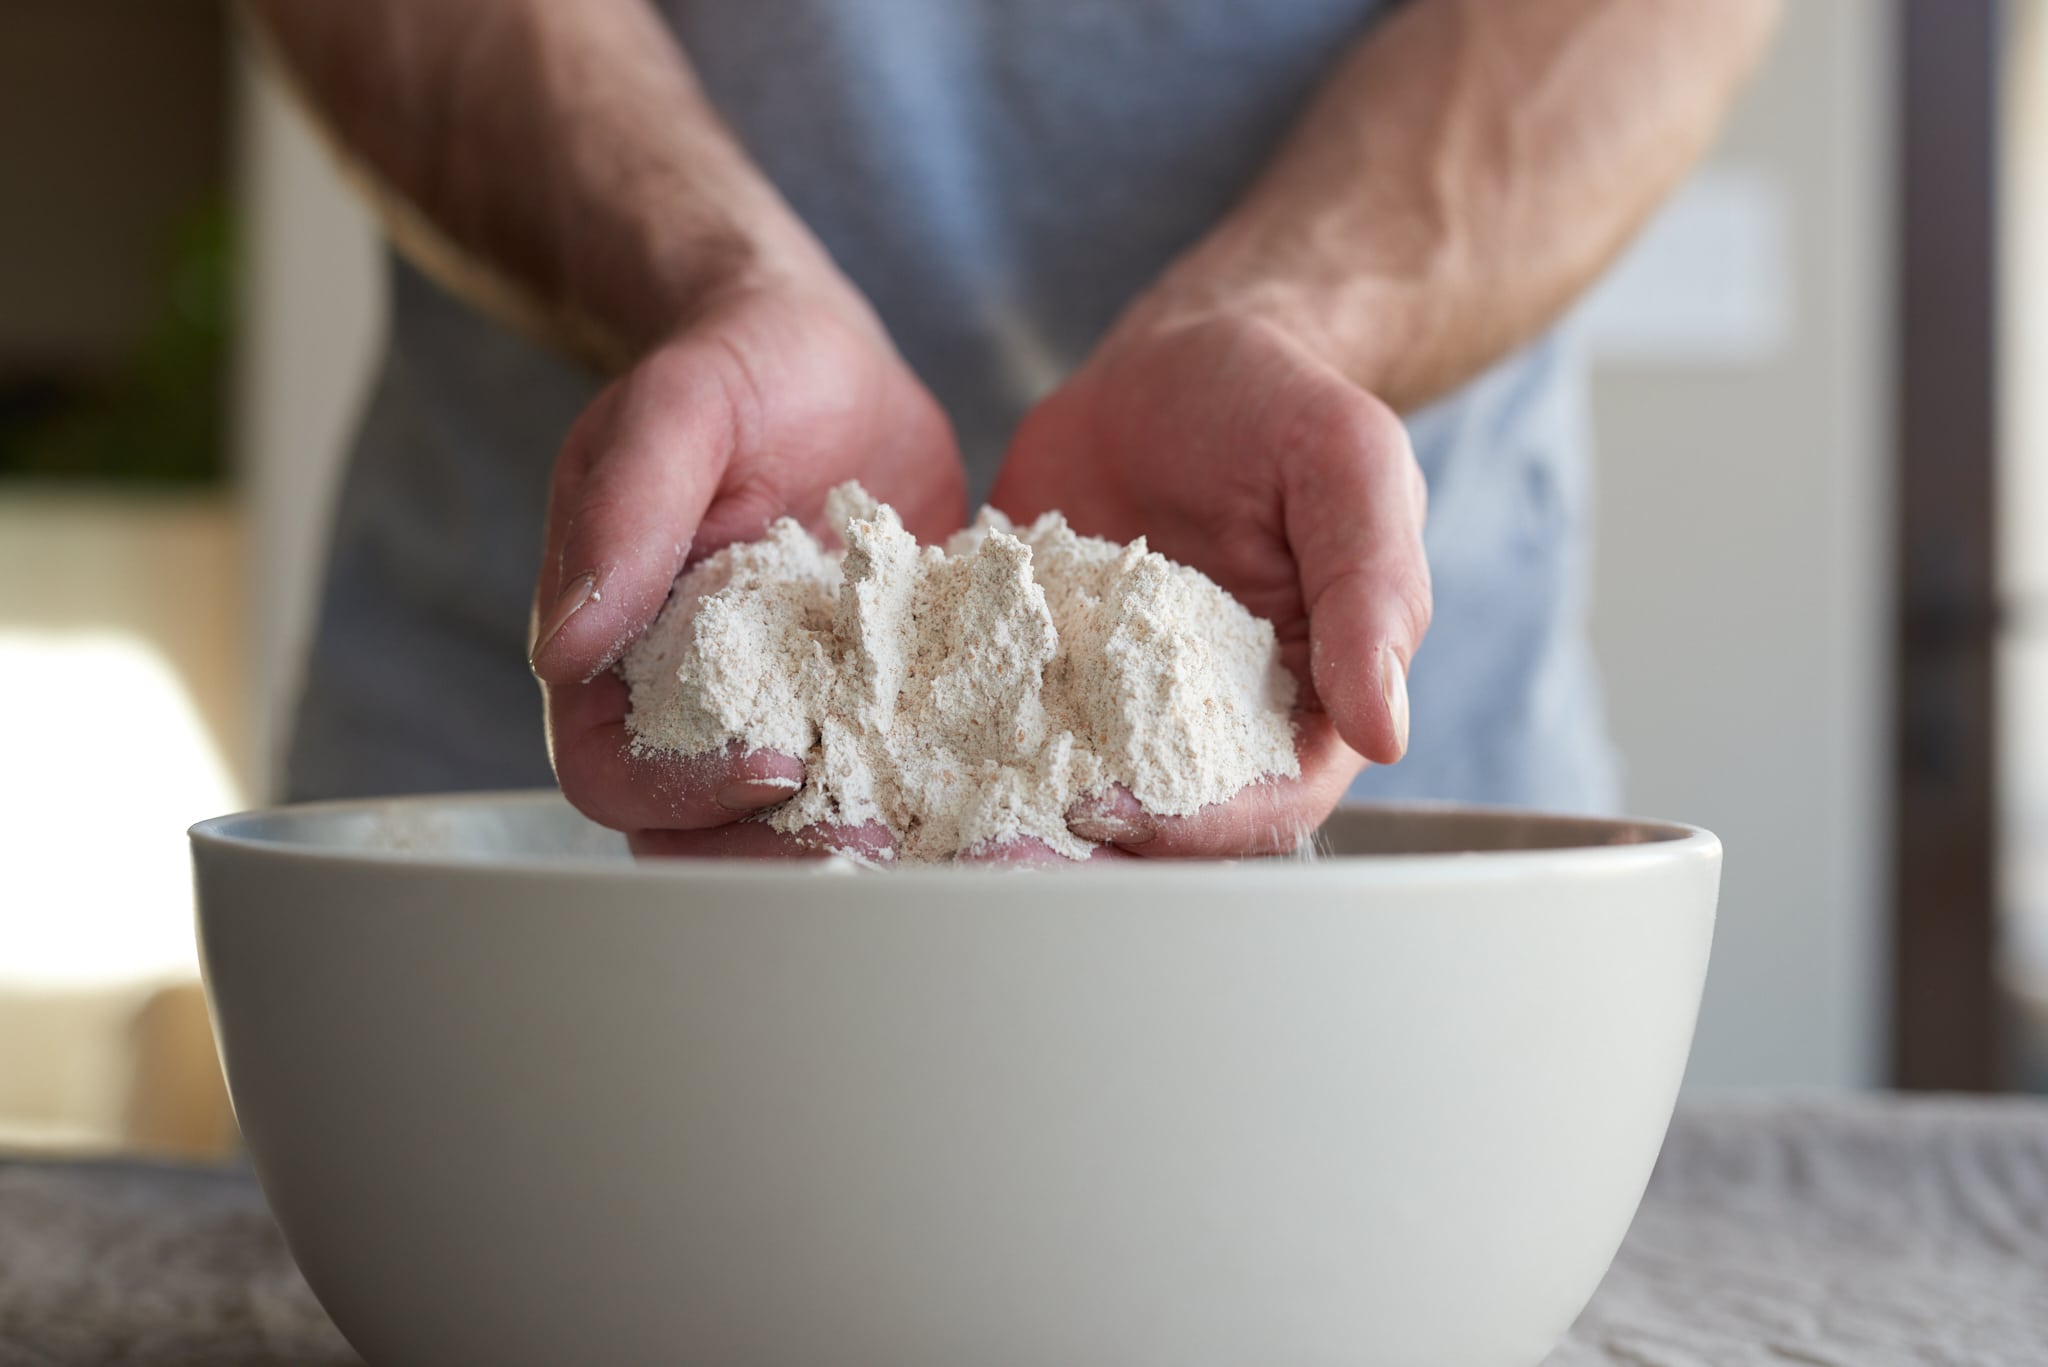 How to bake at home with freshly milled flour